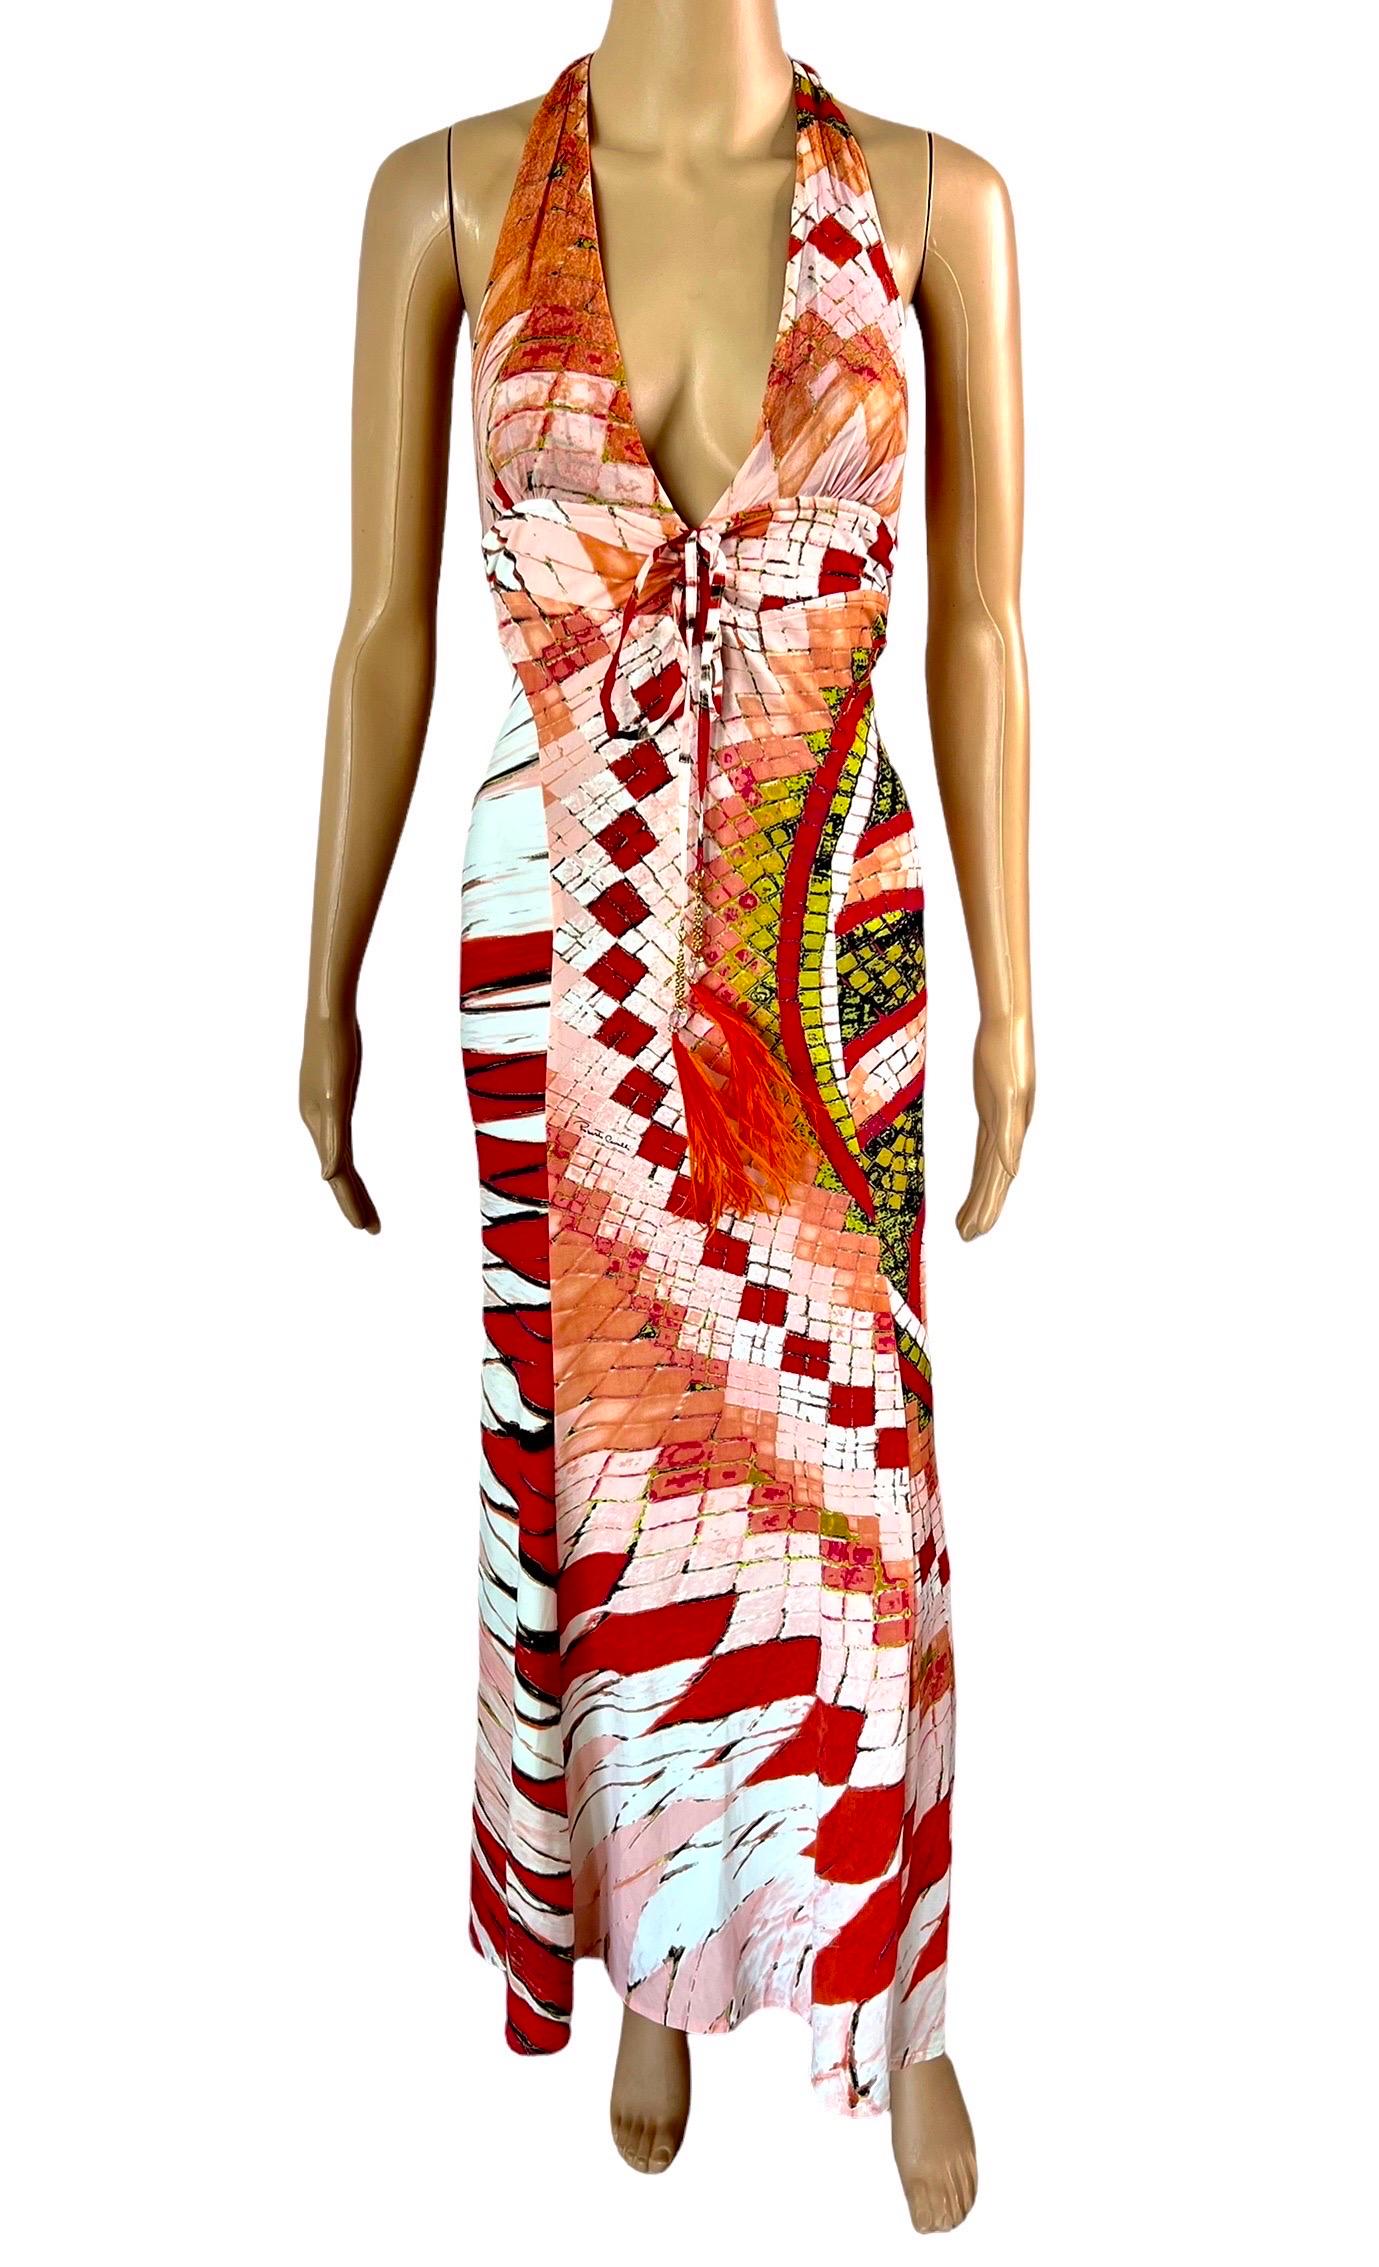 Roberto Cavalli S/S 2004 Plunging Neckline Backless Maxi Evening Dress Gown For Sale 3